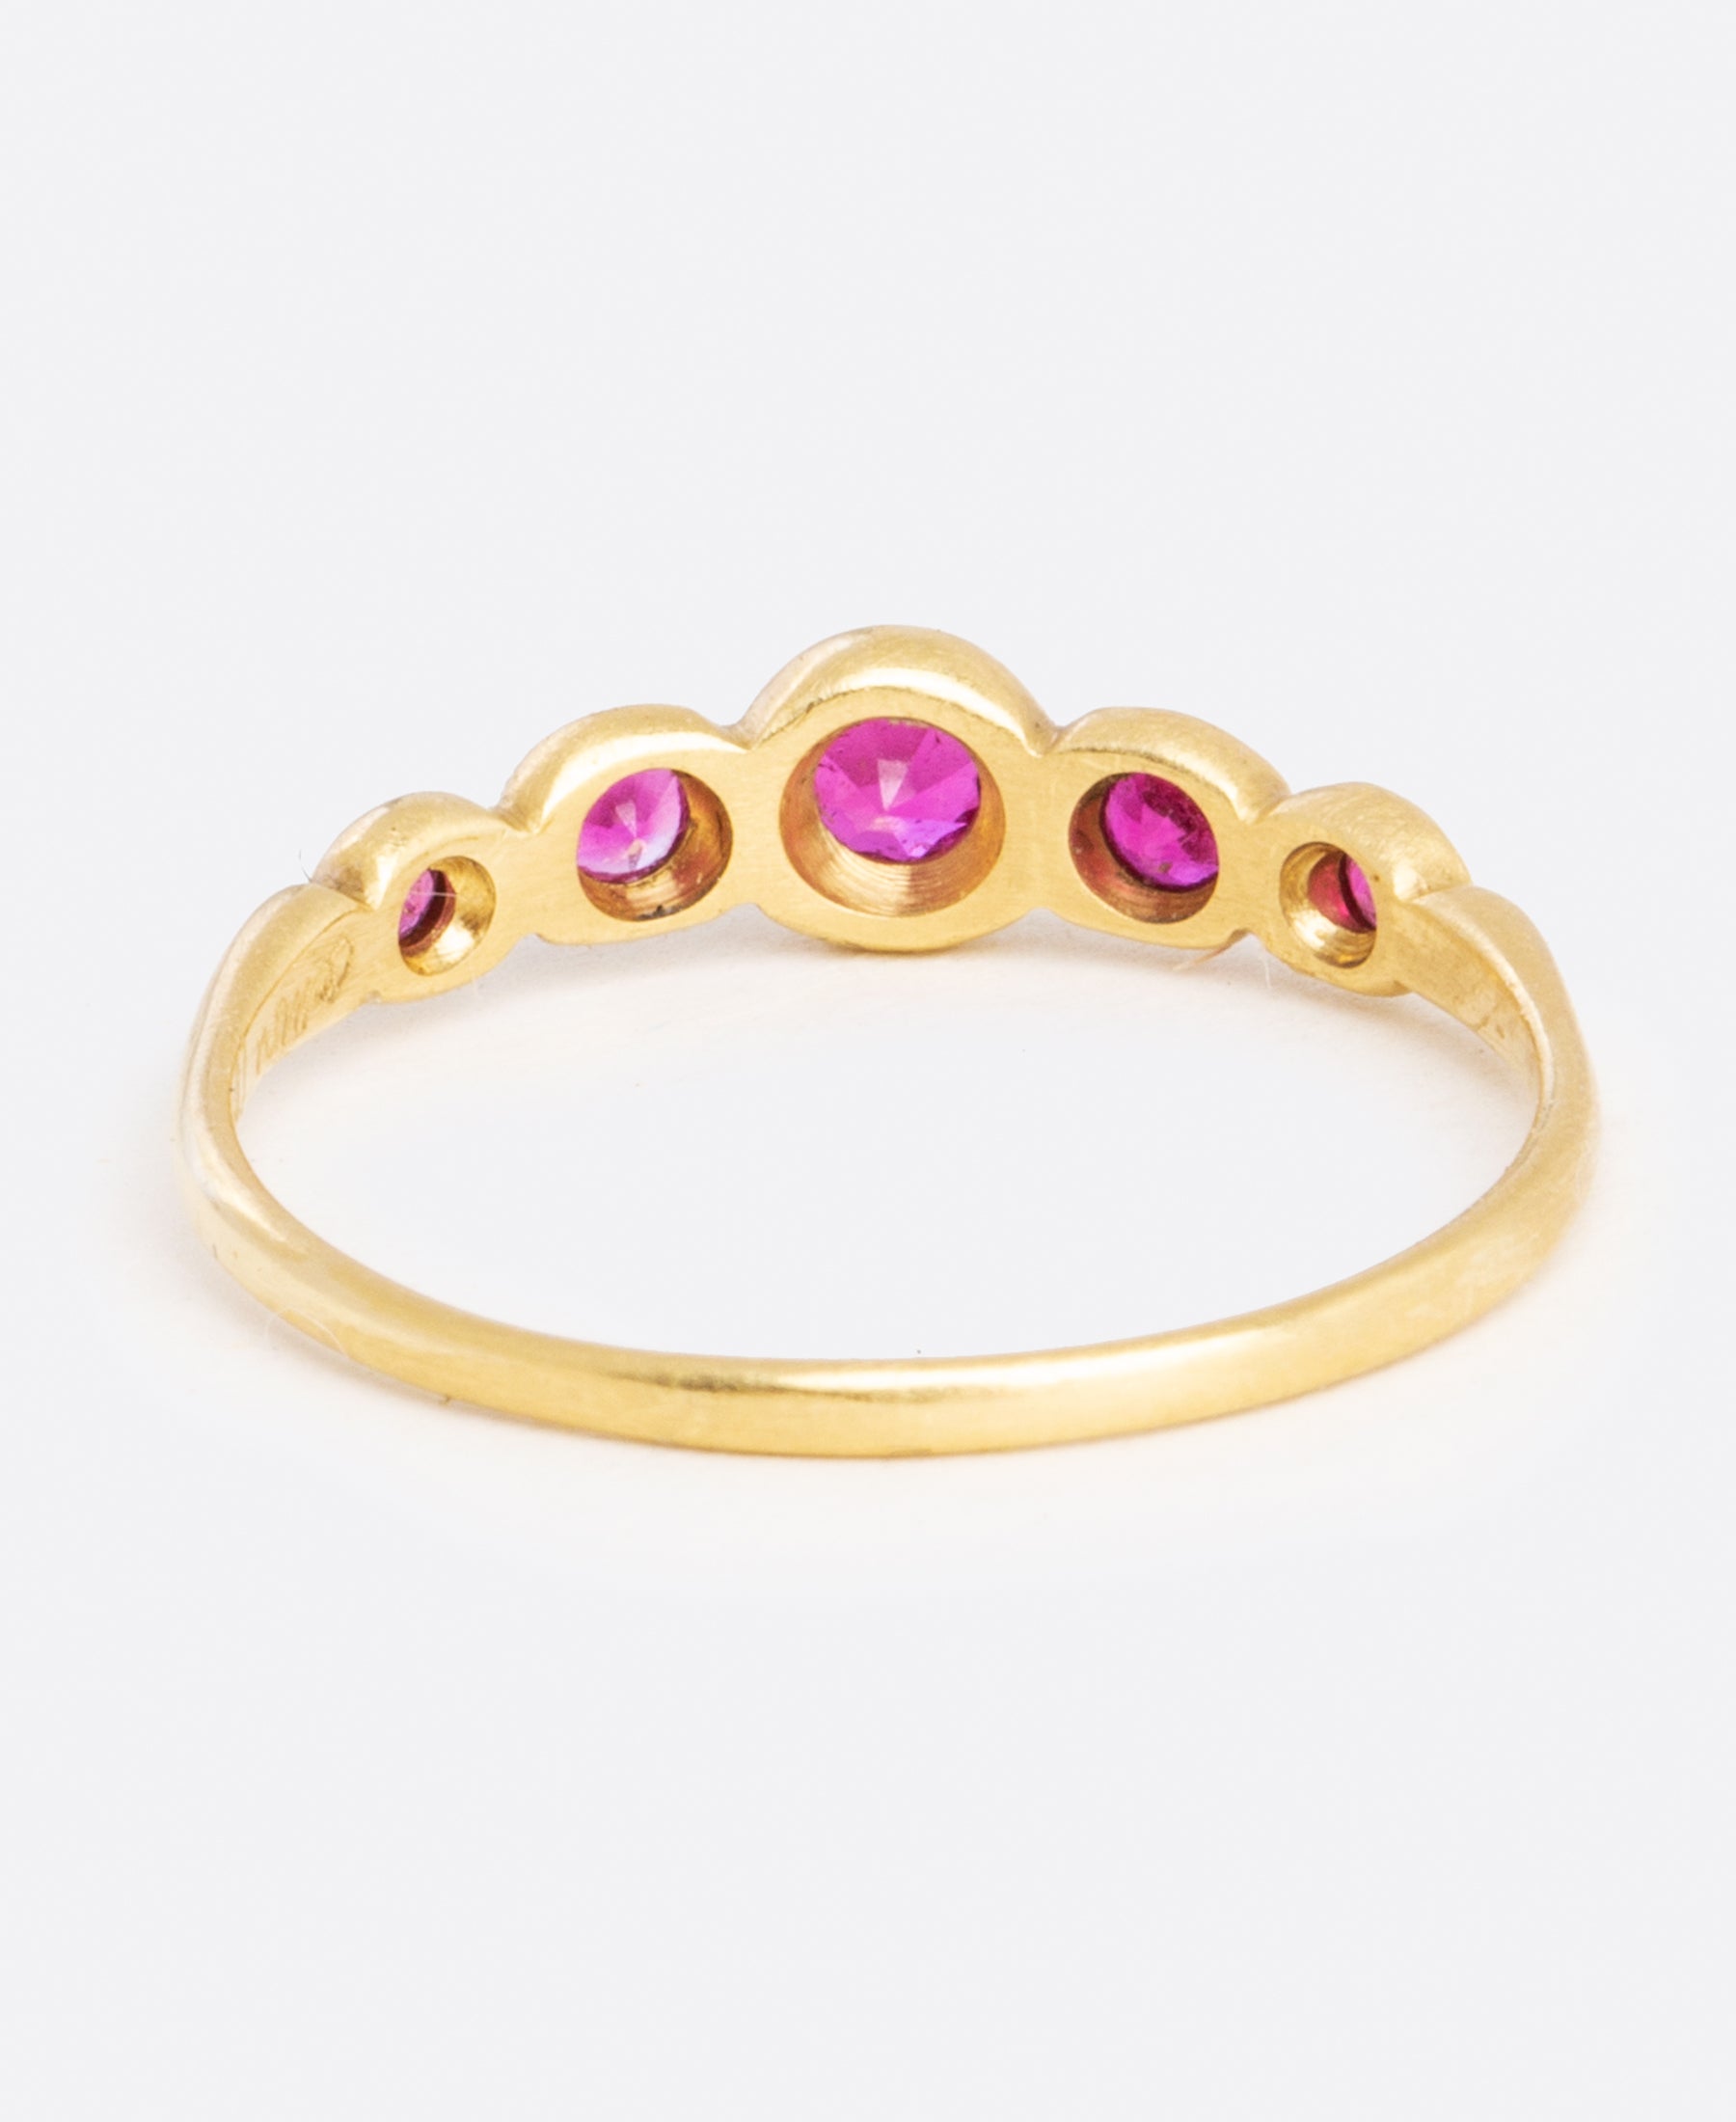 A classic combo, ruby and yellow gold, make up this ring with graduated sizes of stones.